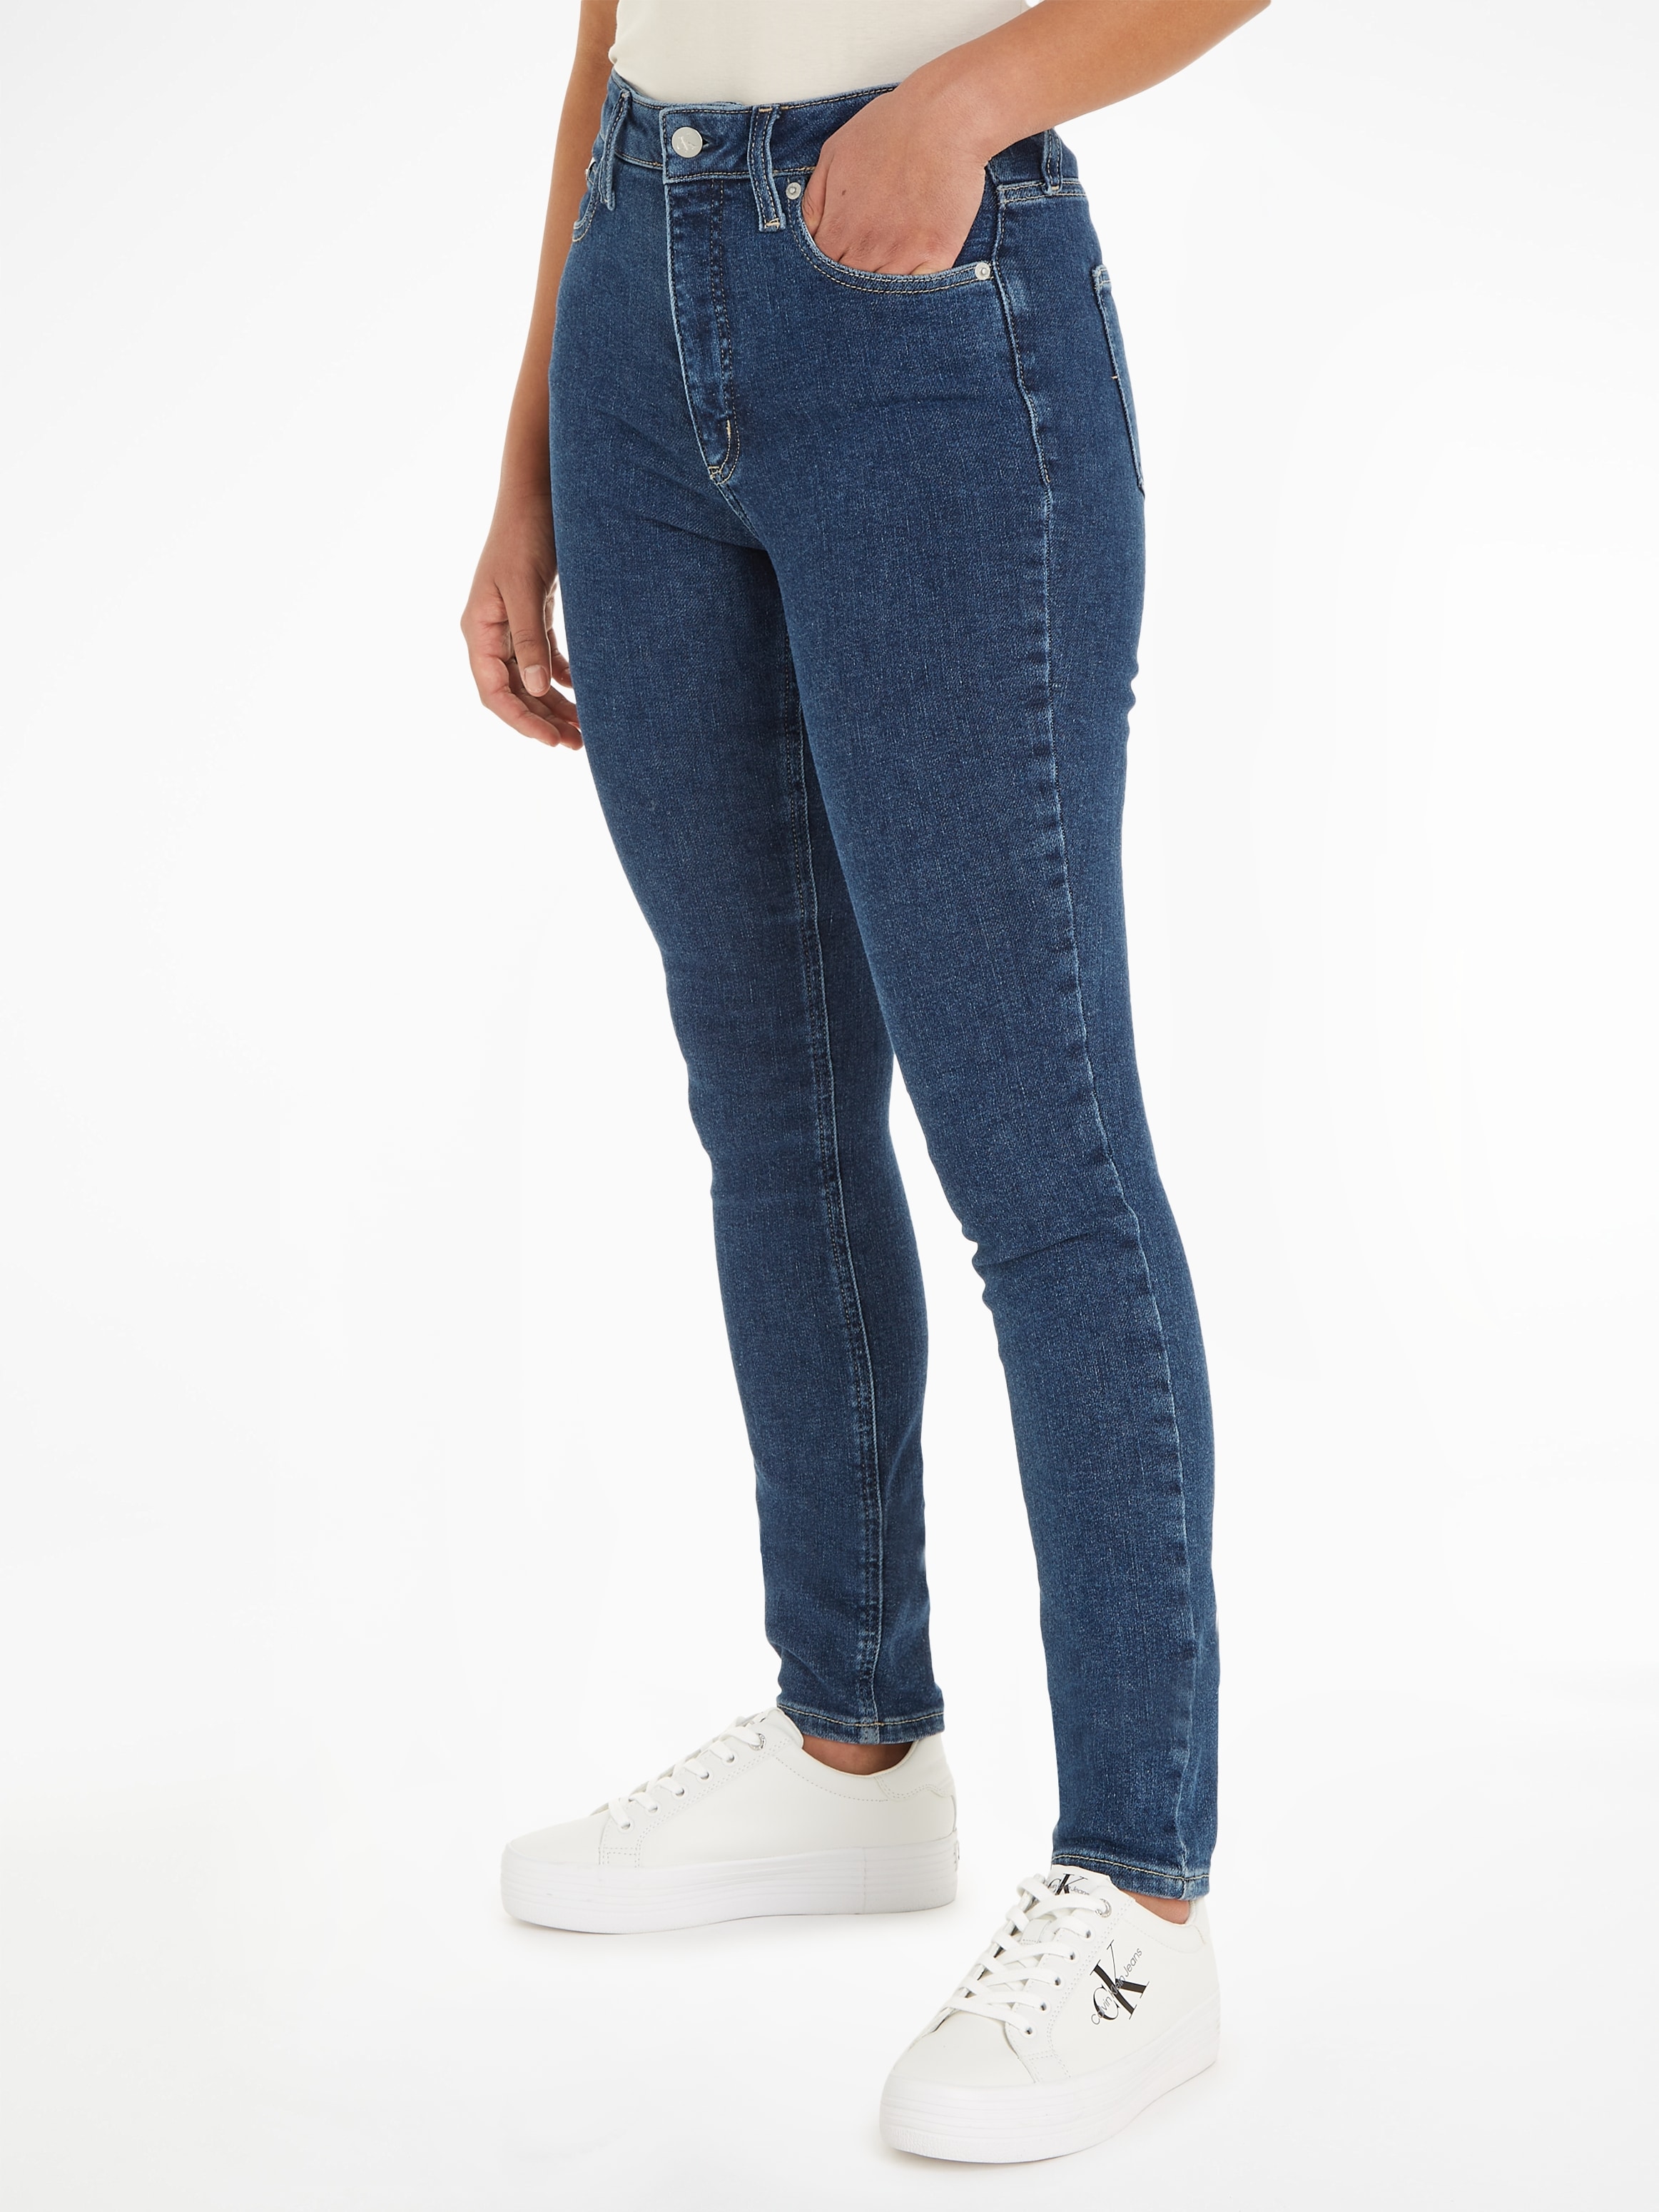 Calvin Klein Jeans Skinny-fit-Jeans »HIGH RISE SKINNY«, im 5-Pocket-Style  kaufen bei OTTO